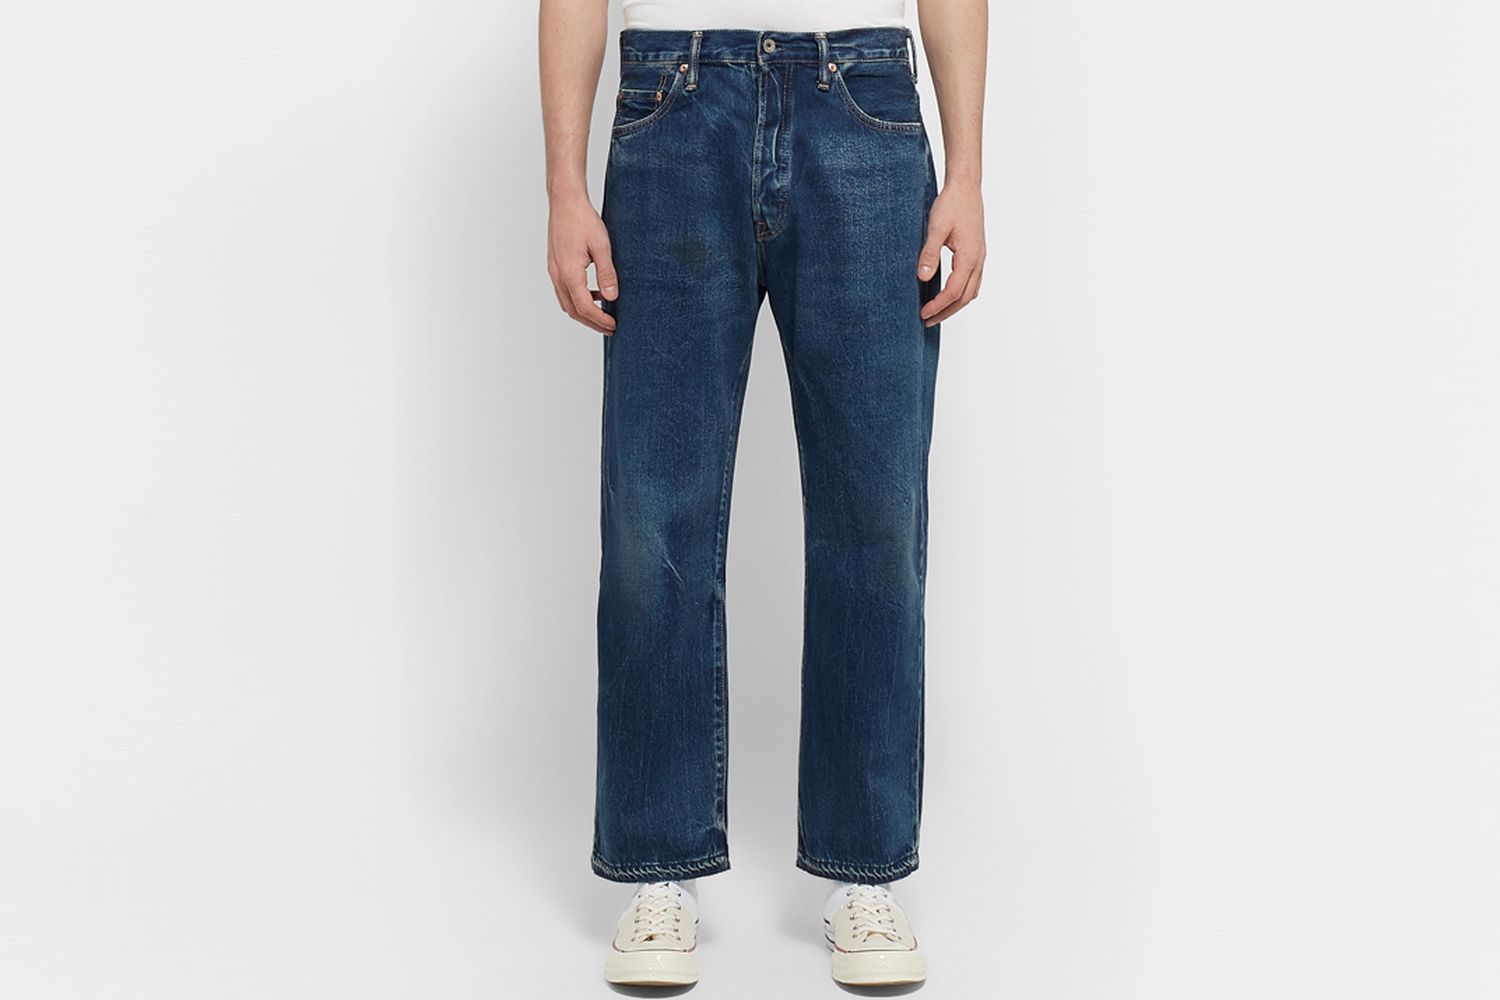 Cropped Washed Selvedge Denim Jeans